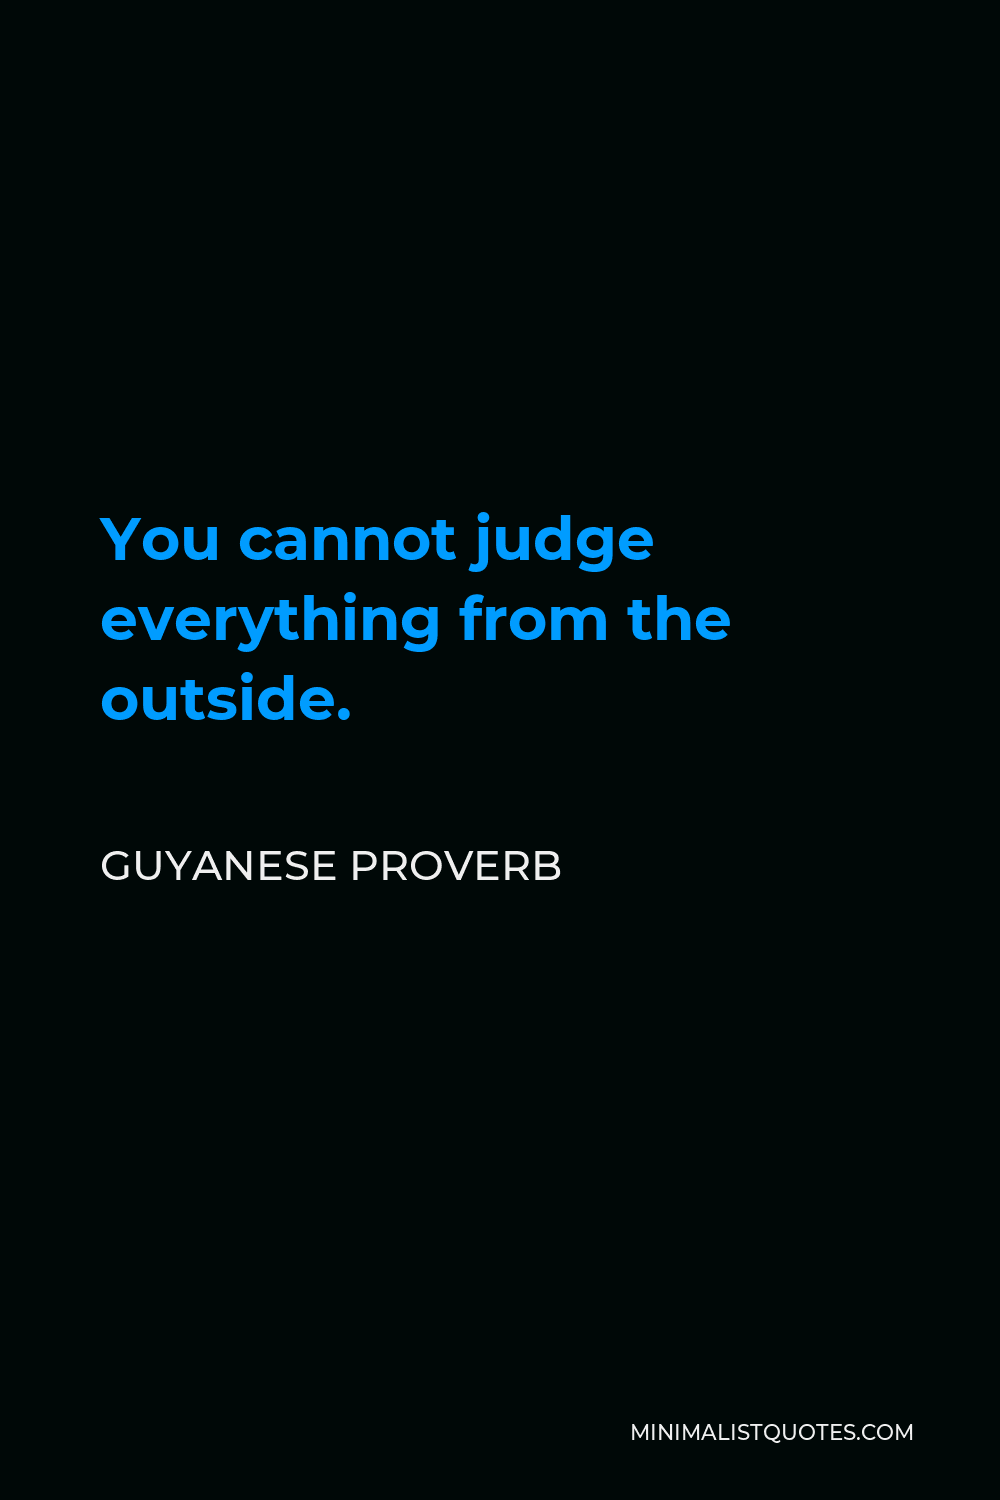 Guyanese Proverb Quote - You cannot judge everything from the outside.